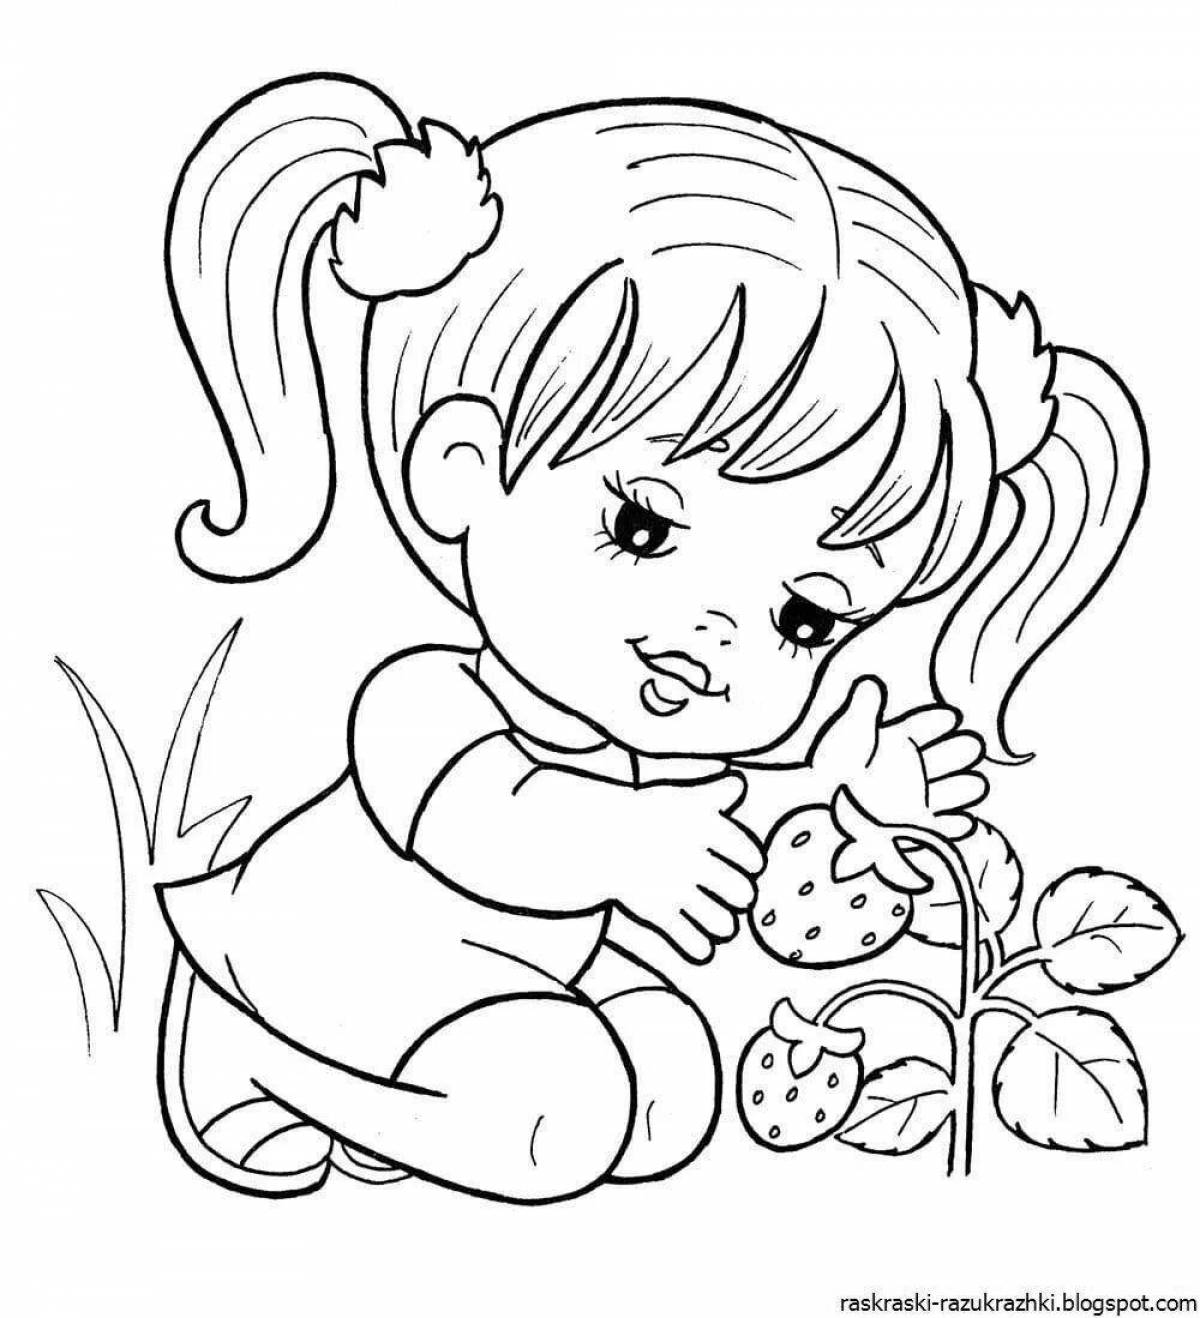 Fun coloring for girls 3-4 years old